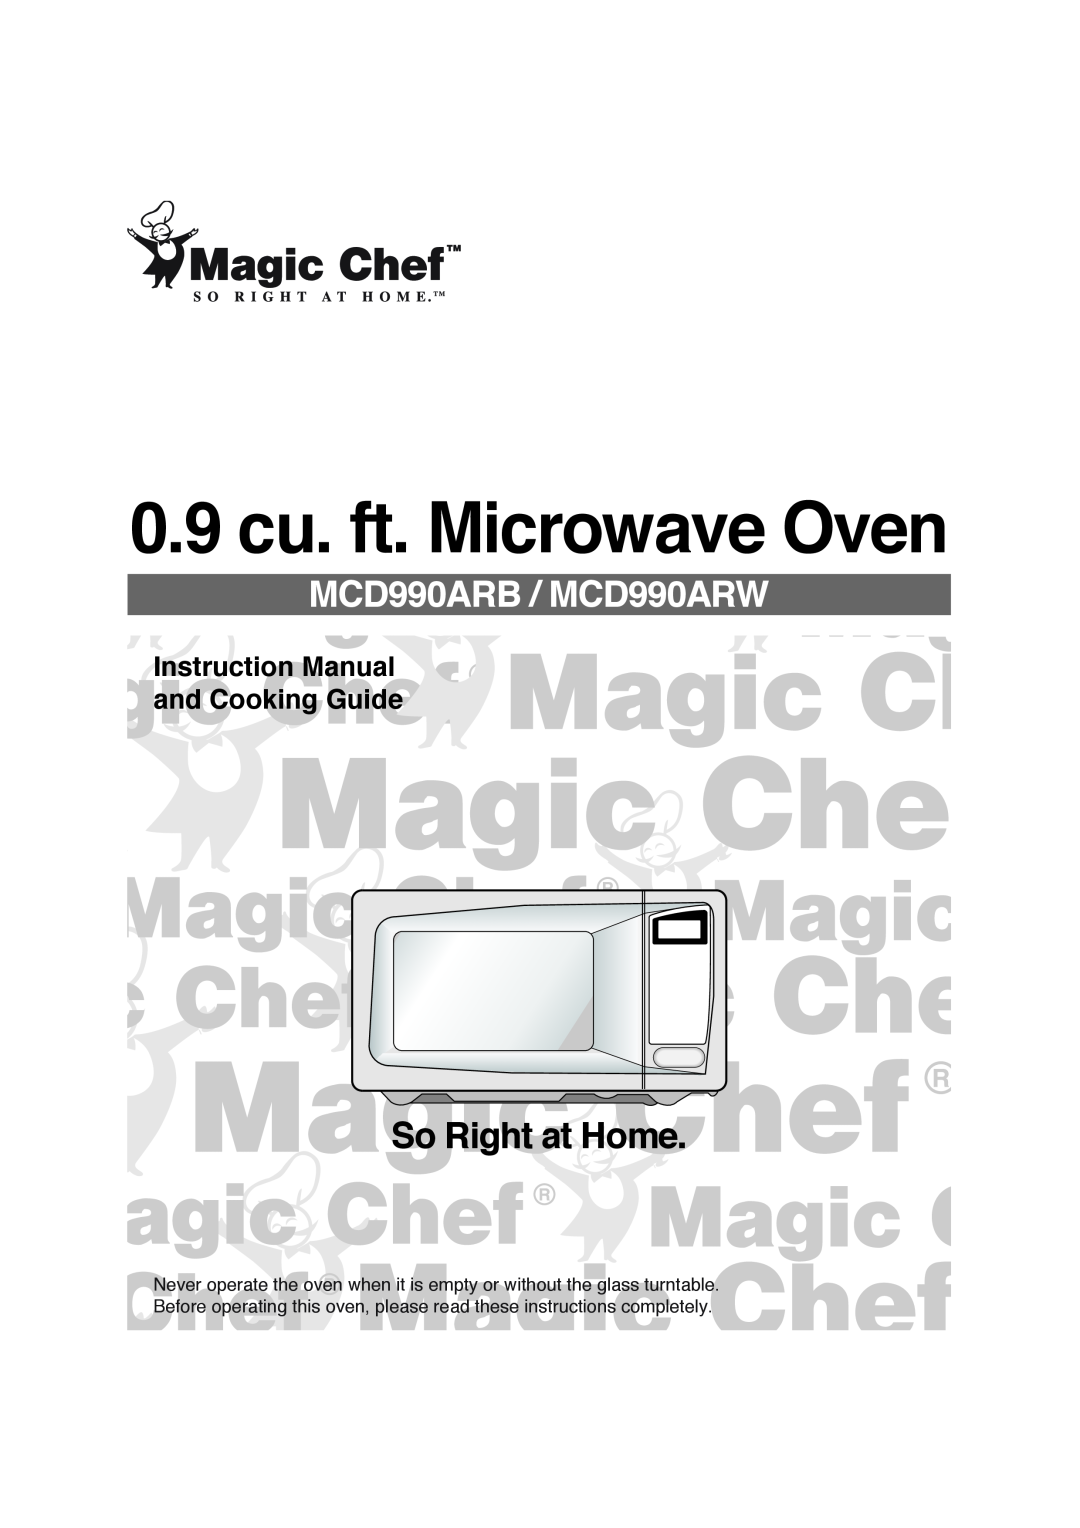 Magic Chef instruction manual 0.9 cu. ft. Microwave Oven, MCD990ARB / MCD990ARW, So Right atHome 